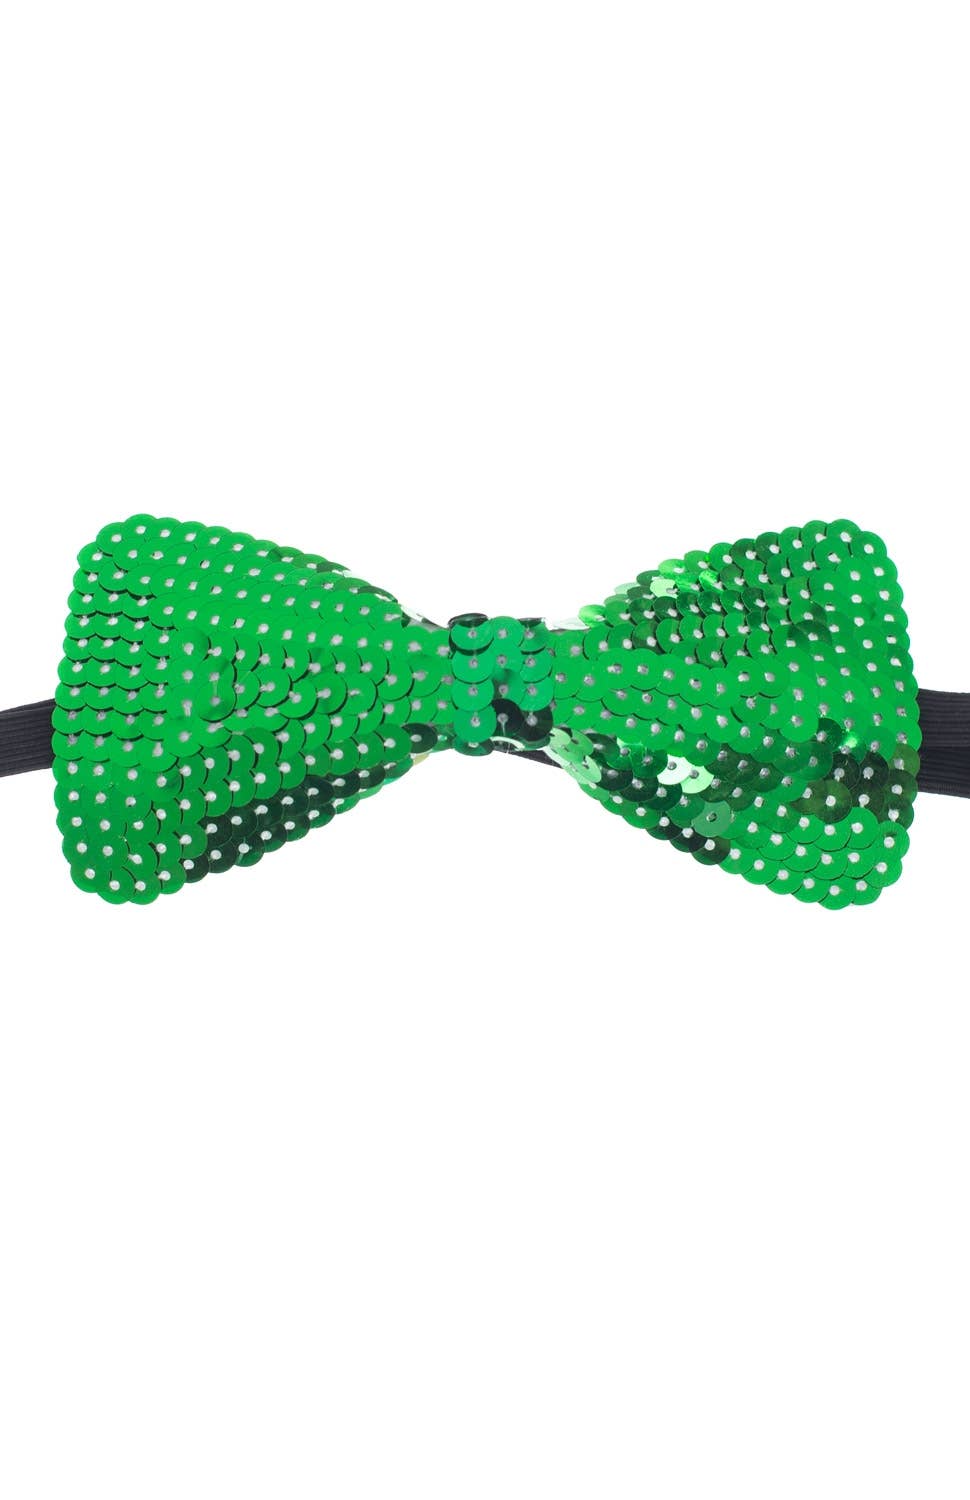 Large Green Stiffened Sequined Bow Tie On Elastic Costume Accessory View 1 